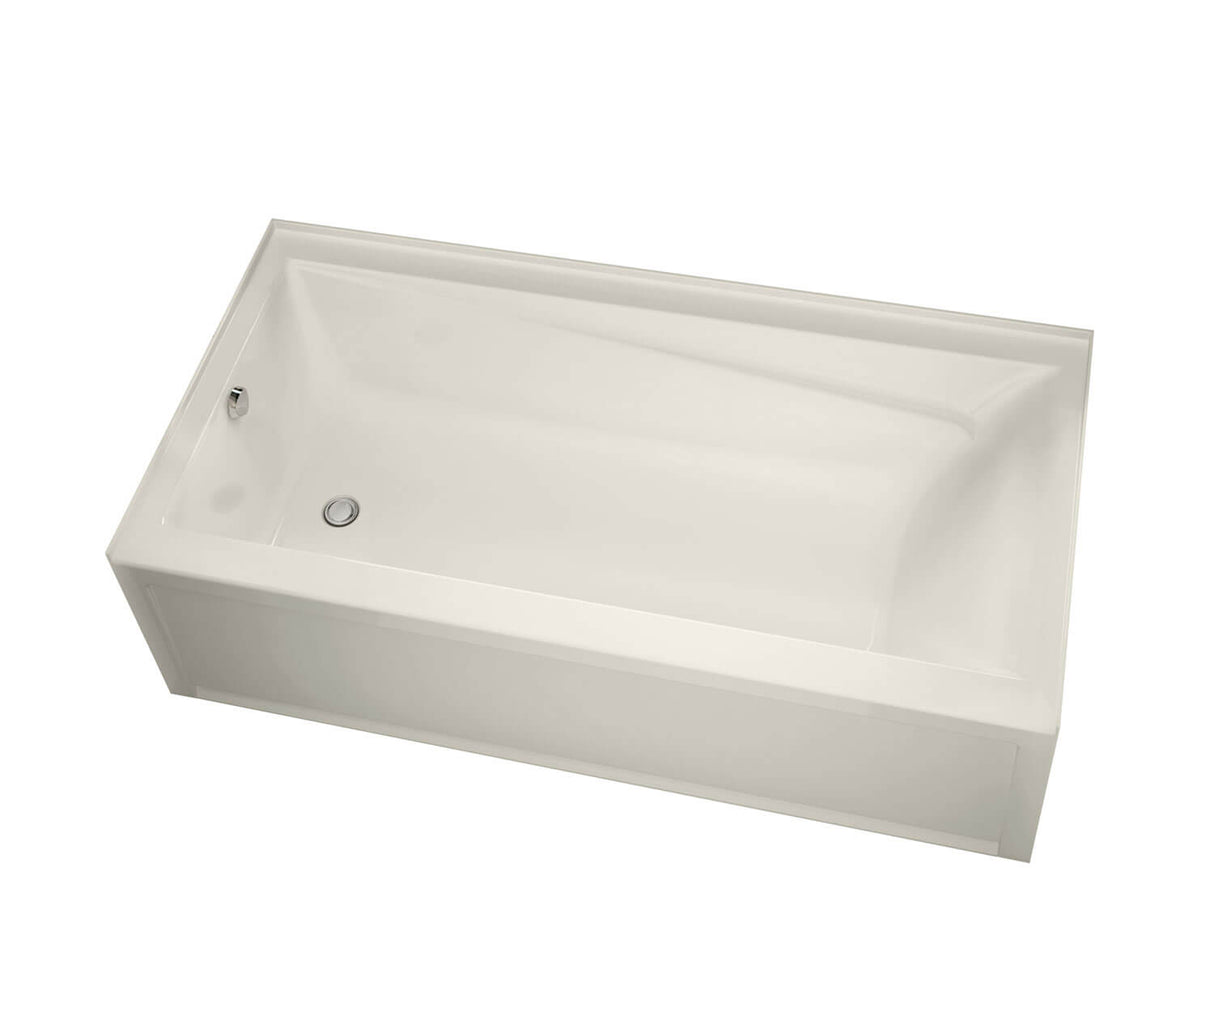 MAAX 106183-L-097-007 Exhibit 7236 IFS Acrylic Alcove Left-Hand Drain Combined Whirlpool & Aeroeffect Bathtub in Biscuit